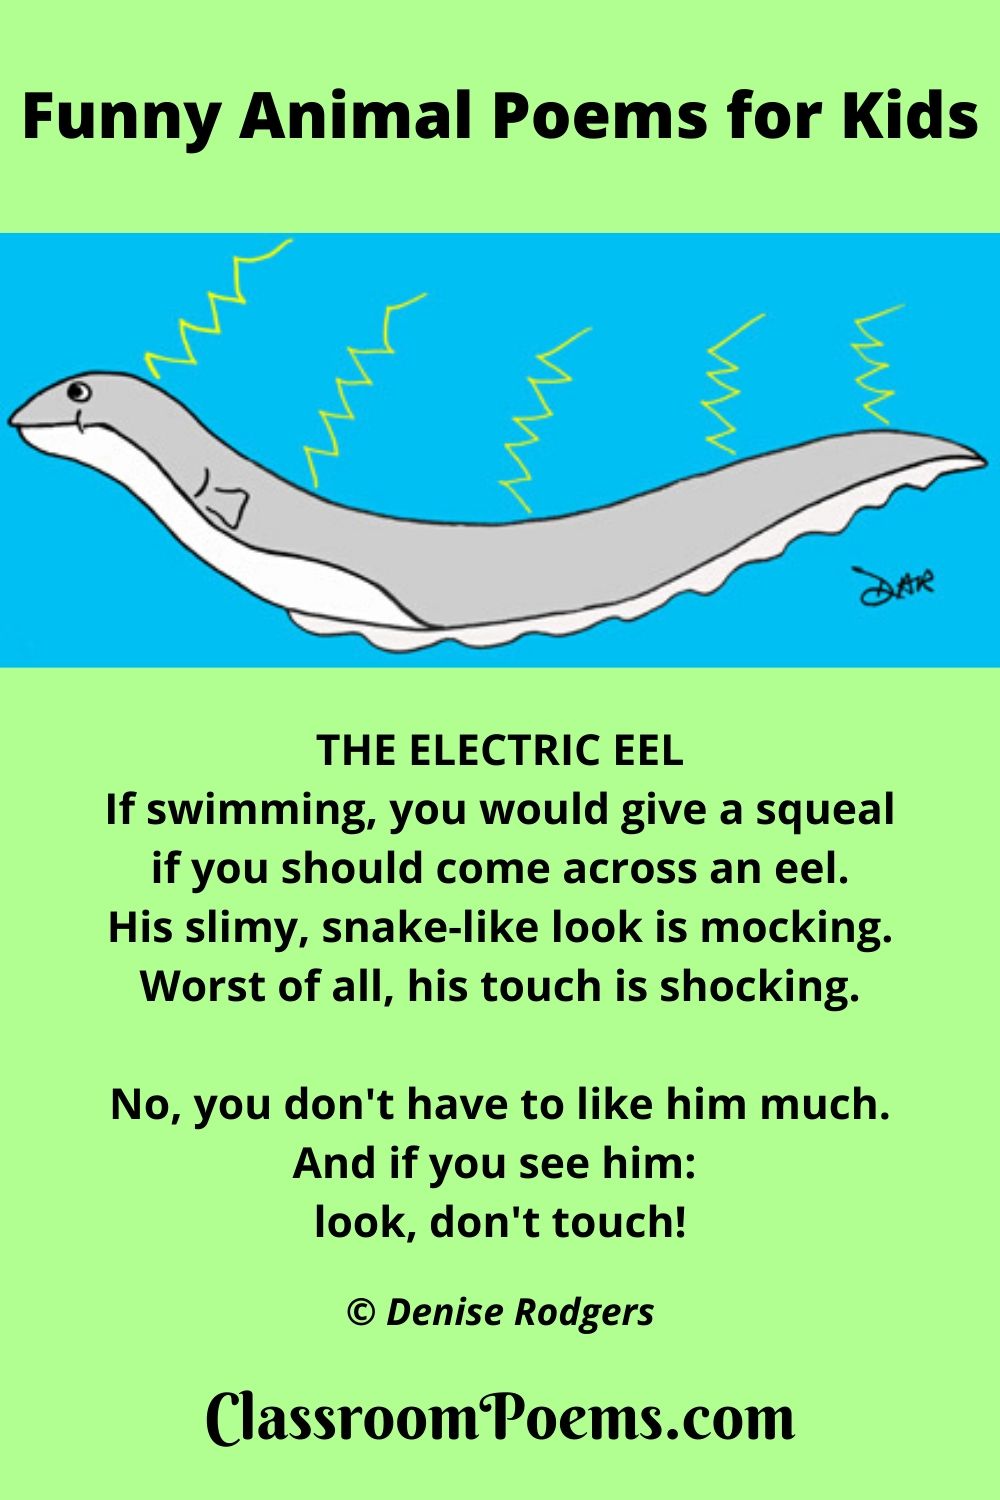 Electric Eel, a funny poem for kids by Denise Rodgers on ClassroomPoems.com.